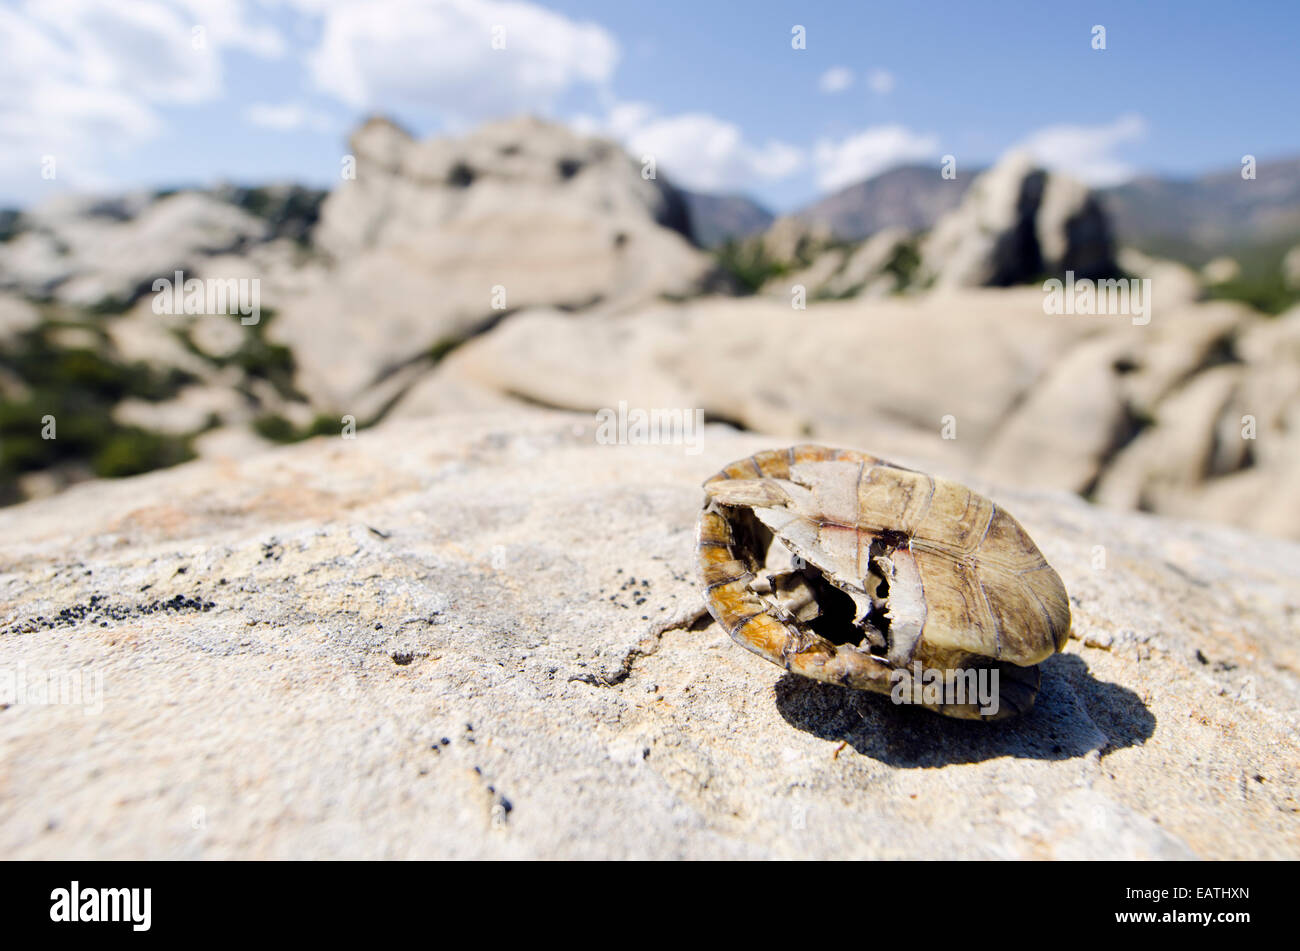 A threatened Western Pond Turtle shell, Actinemys marmorata, eaten by an aerial predator. Stock Photo